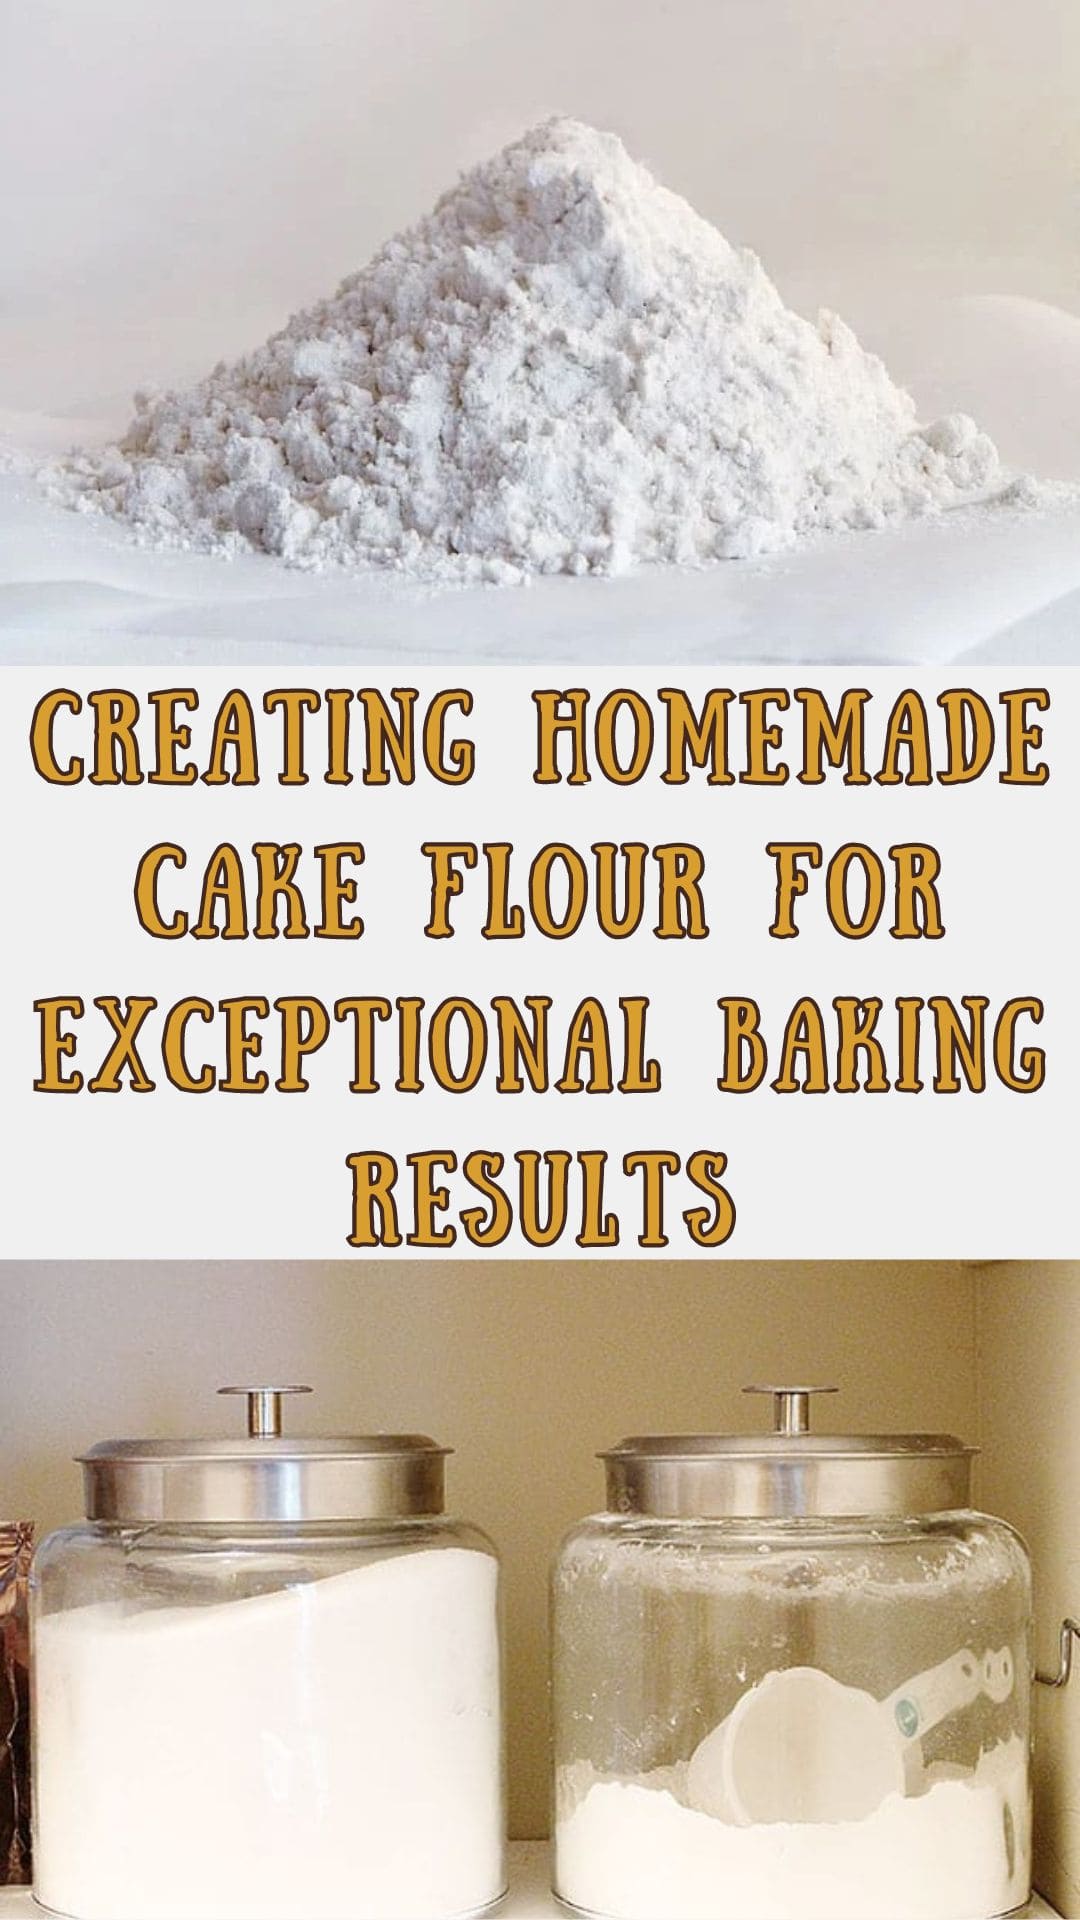 Creating Homemade Cake Flour for Exceptional Baking Results